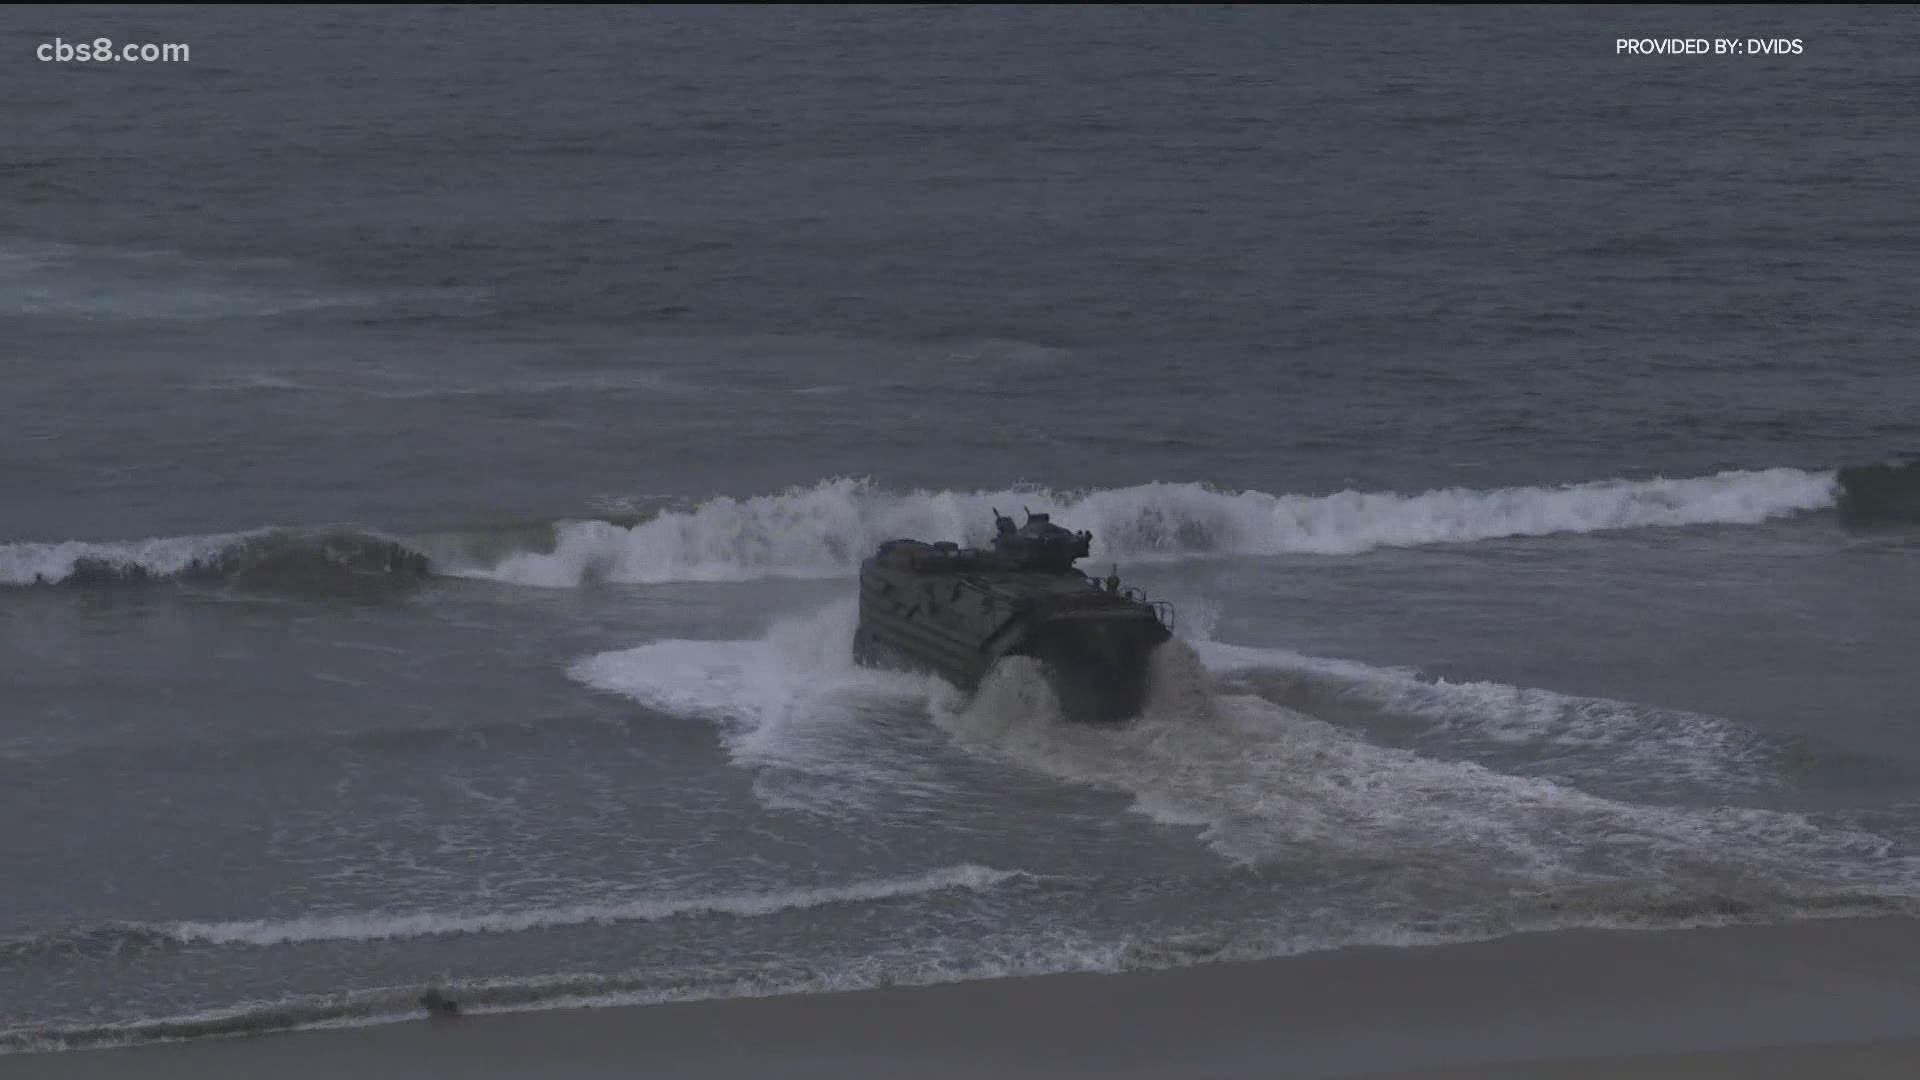 During the routine exercise at San Clemente island the AAV sank after taking on water more than 1,000 meters off shore.